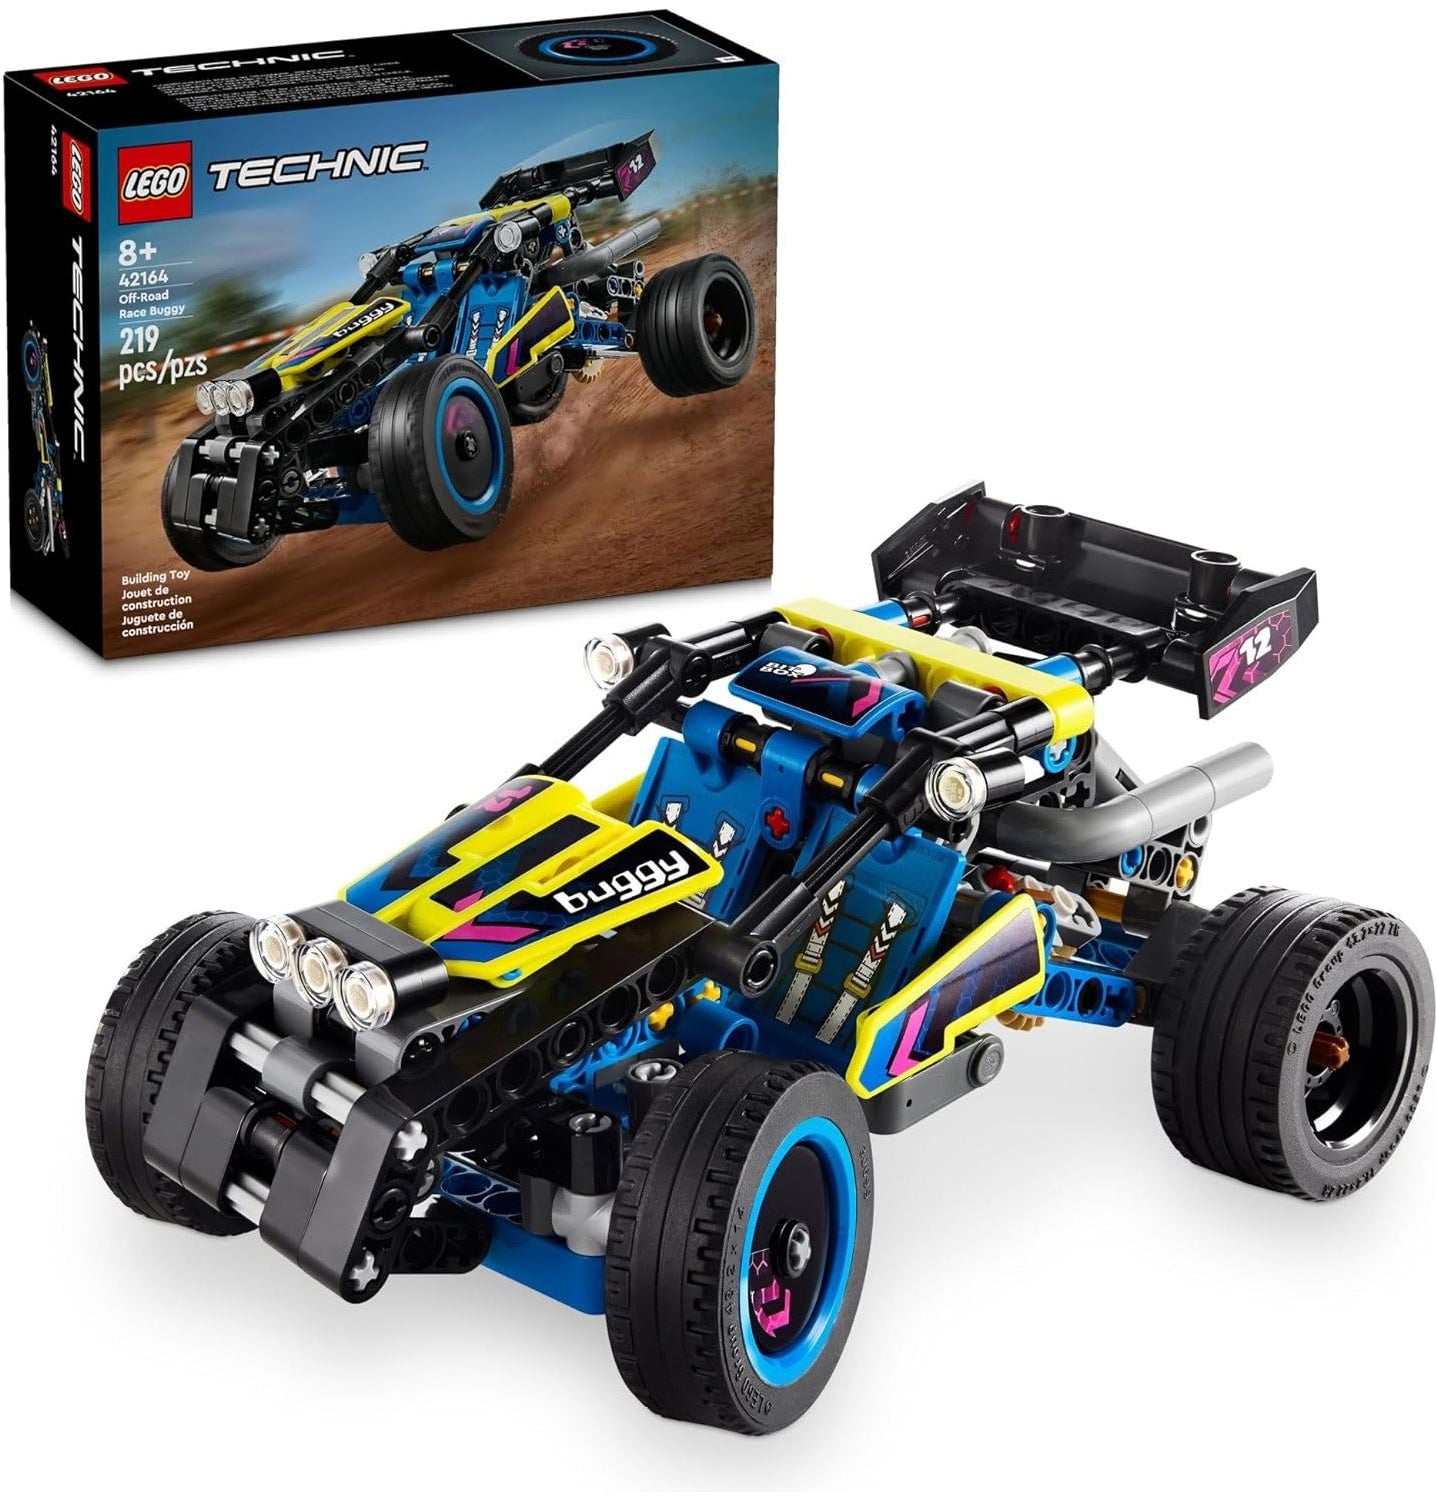 LEGO 42164 Technic Off-Road Race Buggy Buildable Car Toy, Cool Toy for 8 Year Old Boys, Girls and Kids who Love Rally Contests, Race Car Toy Featuring Moving 4-Cylinder Engine and Working Suspension.